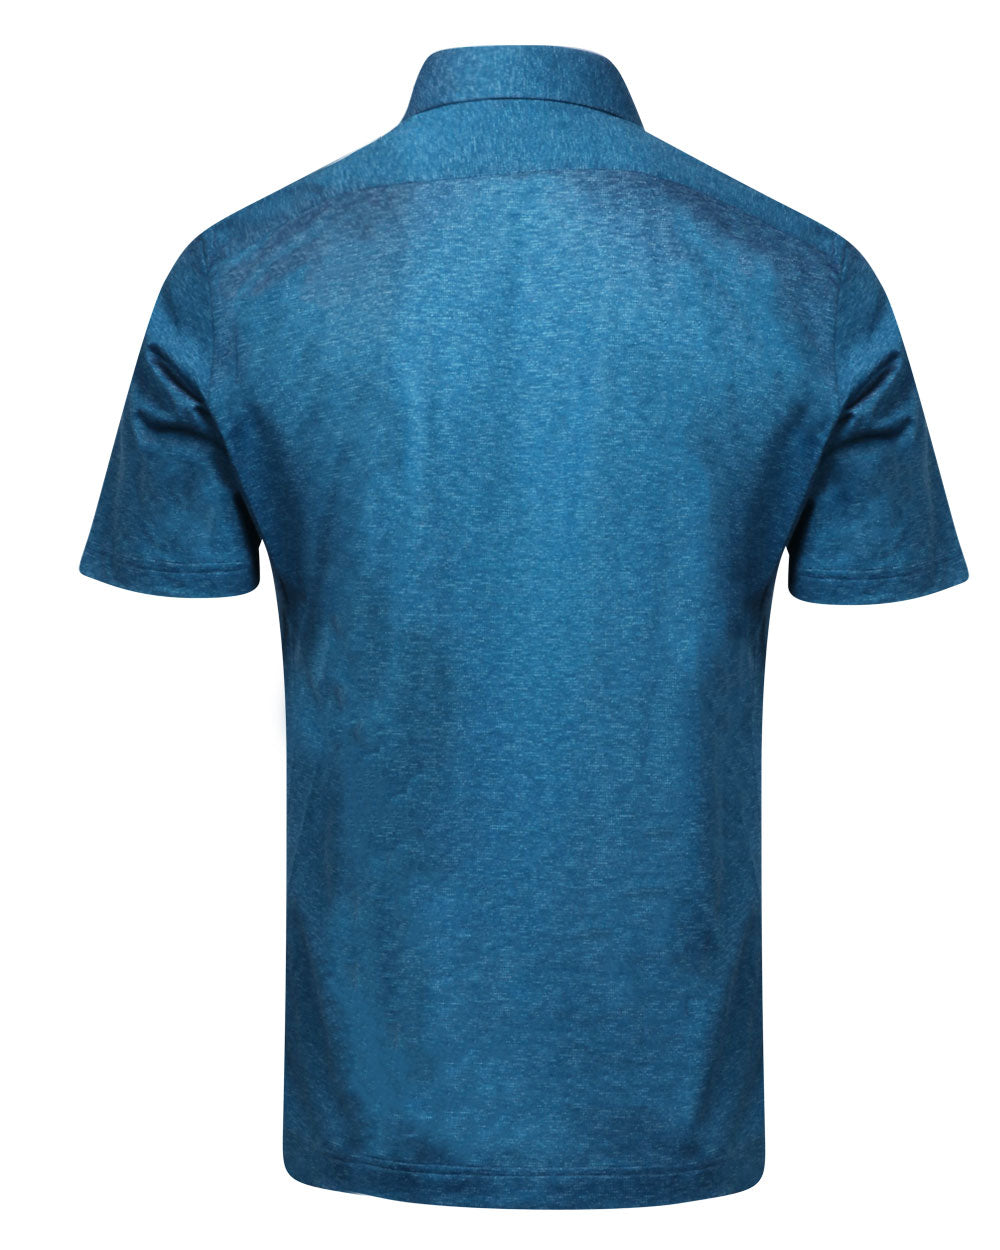 Heathered Teal Pique Polo